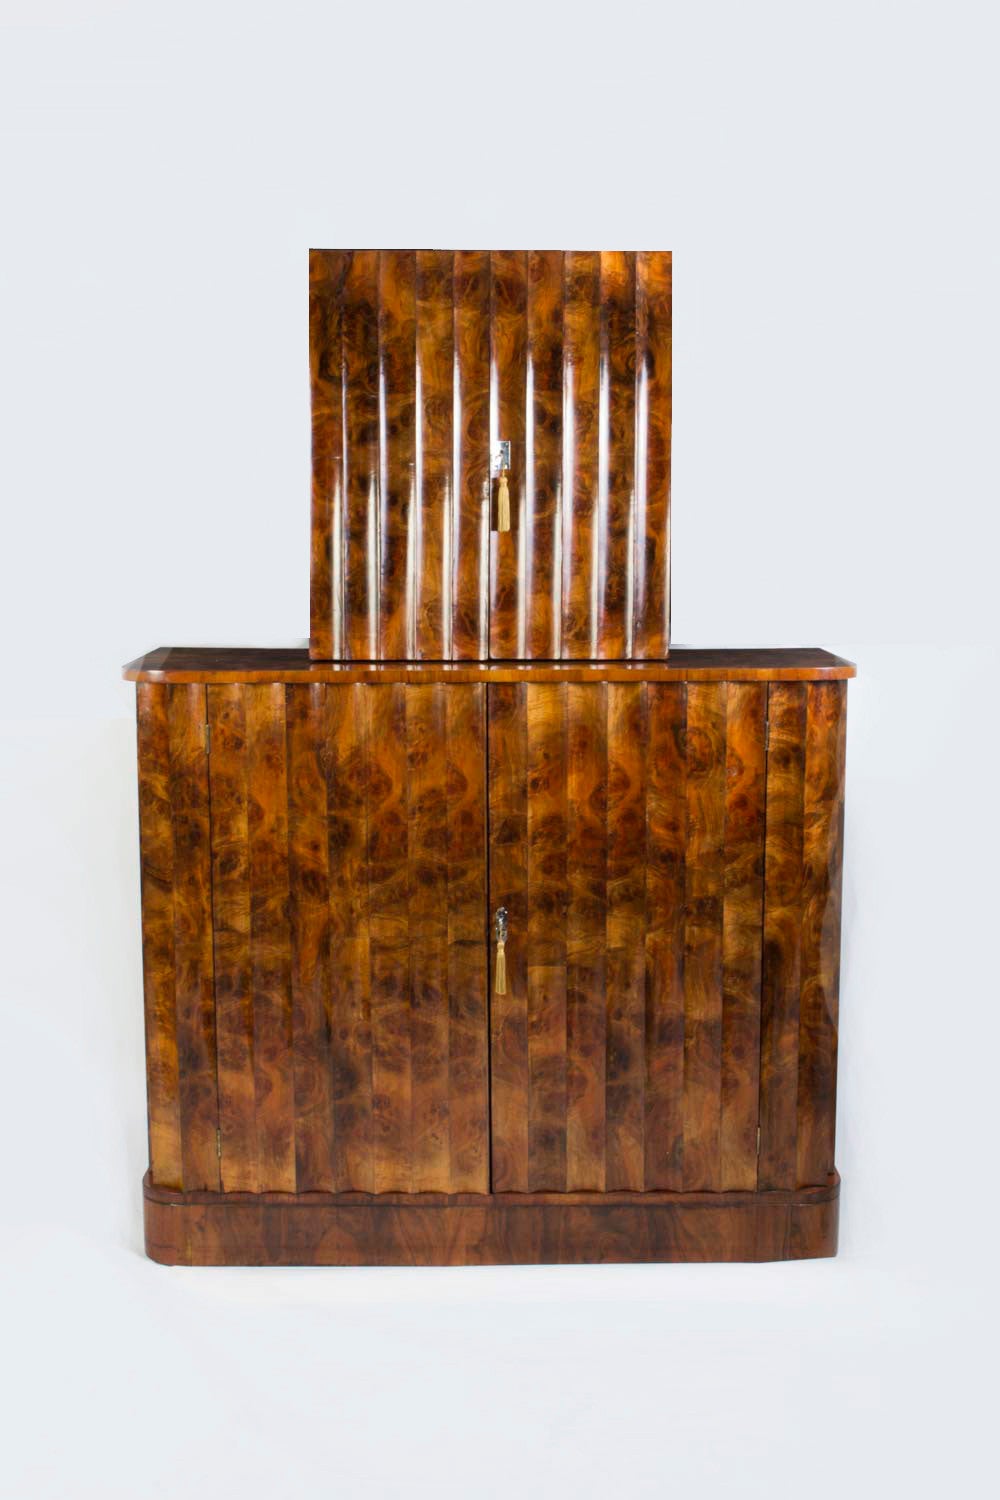 This is a very elegant antique Art Deco burr walnut cocktail cabinet circa 1920 in date. 

The cocktail cabinet is in two parts with fluted front and sides. 

The top section opens to reveal a mirrored interior with glass shelves and a pull out